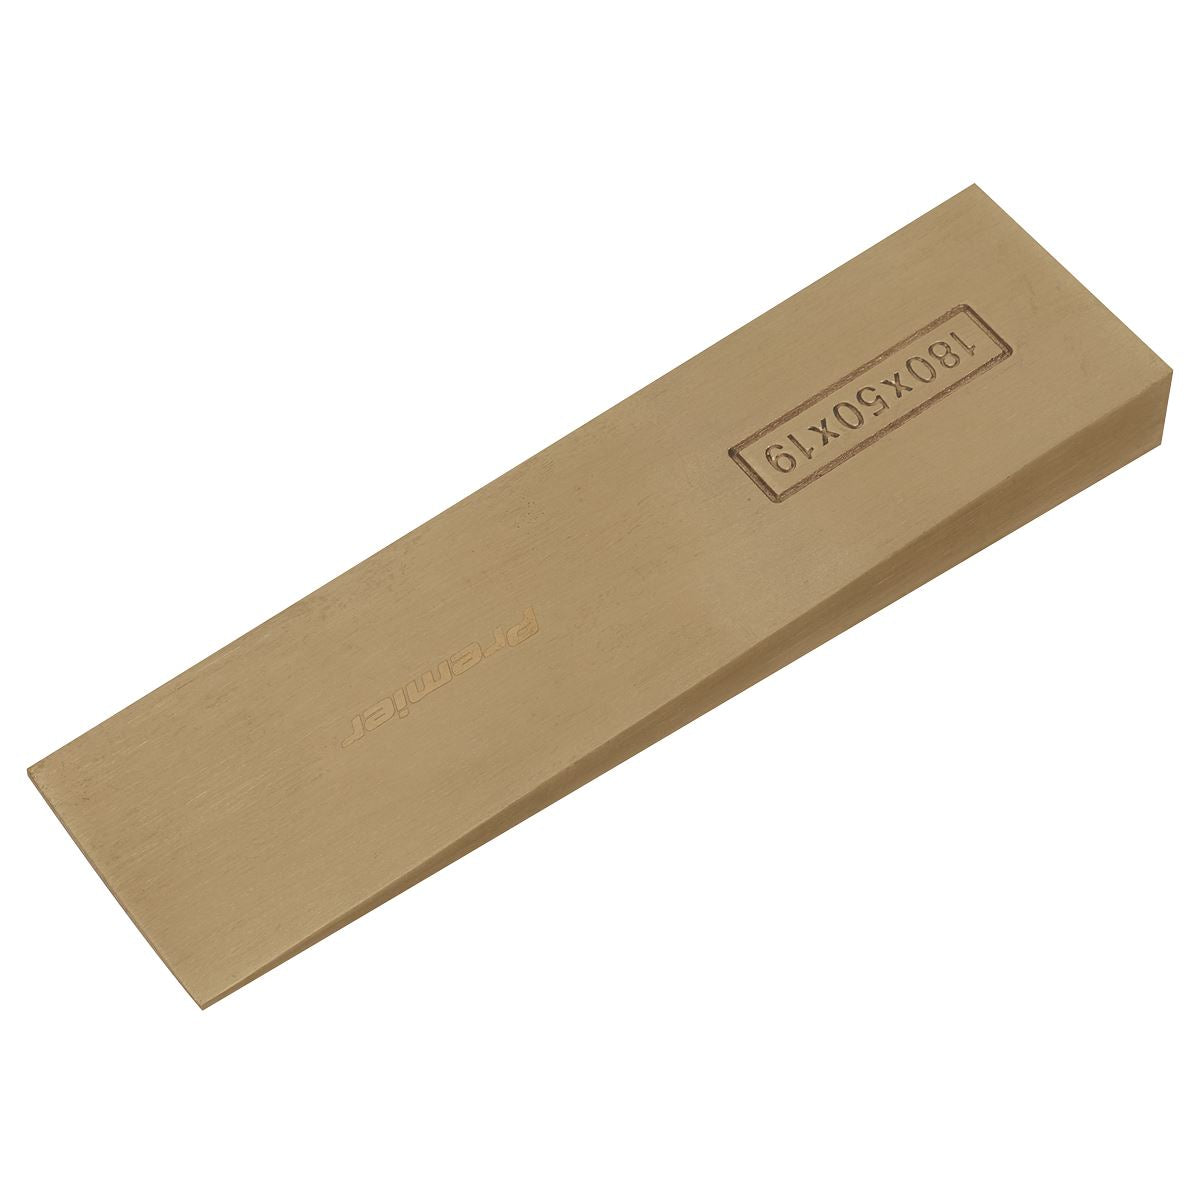 Sealey Premier Wedge 180 x 50 x 19mm - Non-Sparking